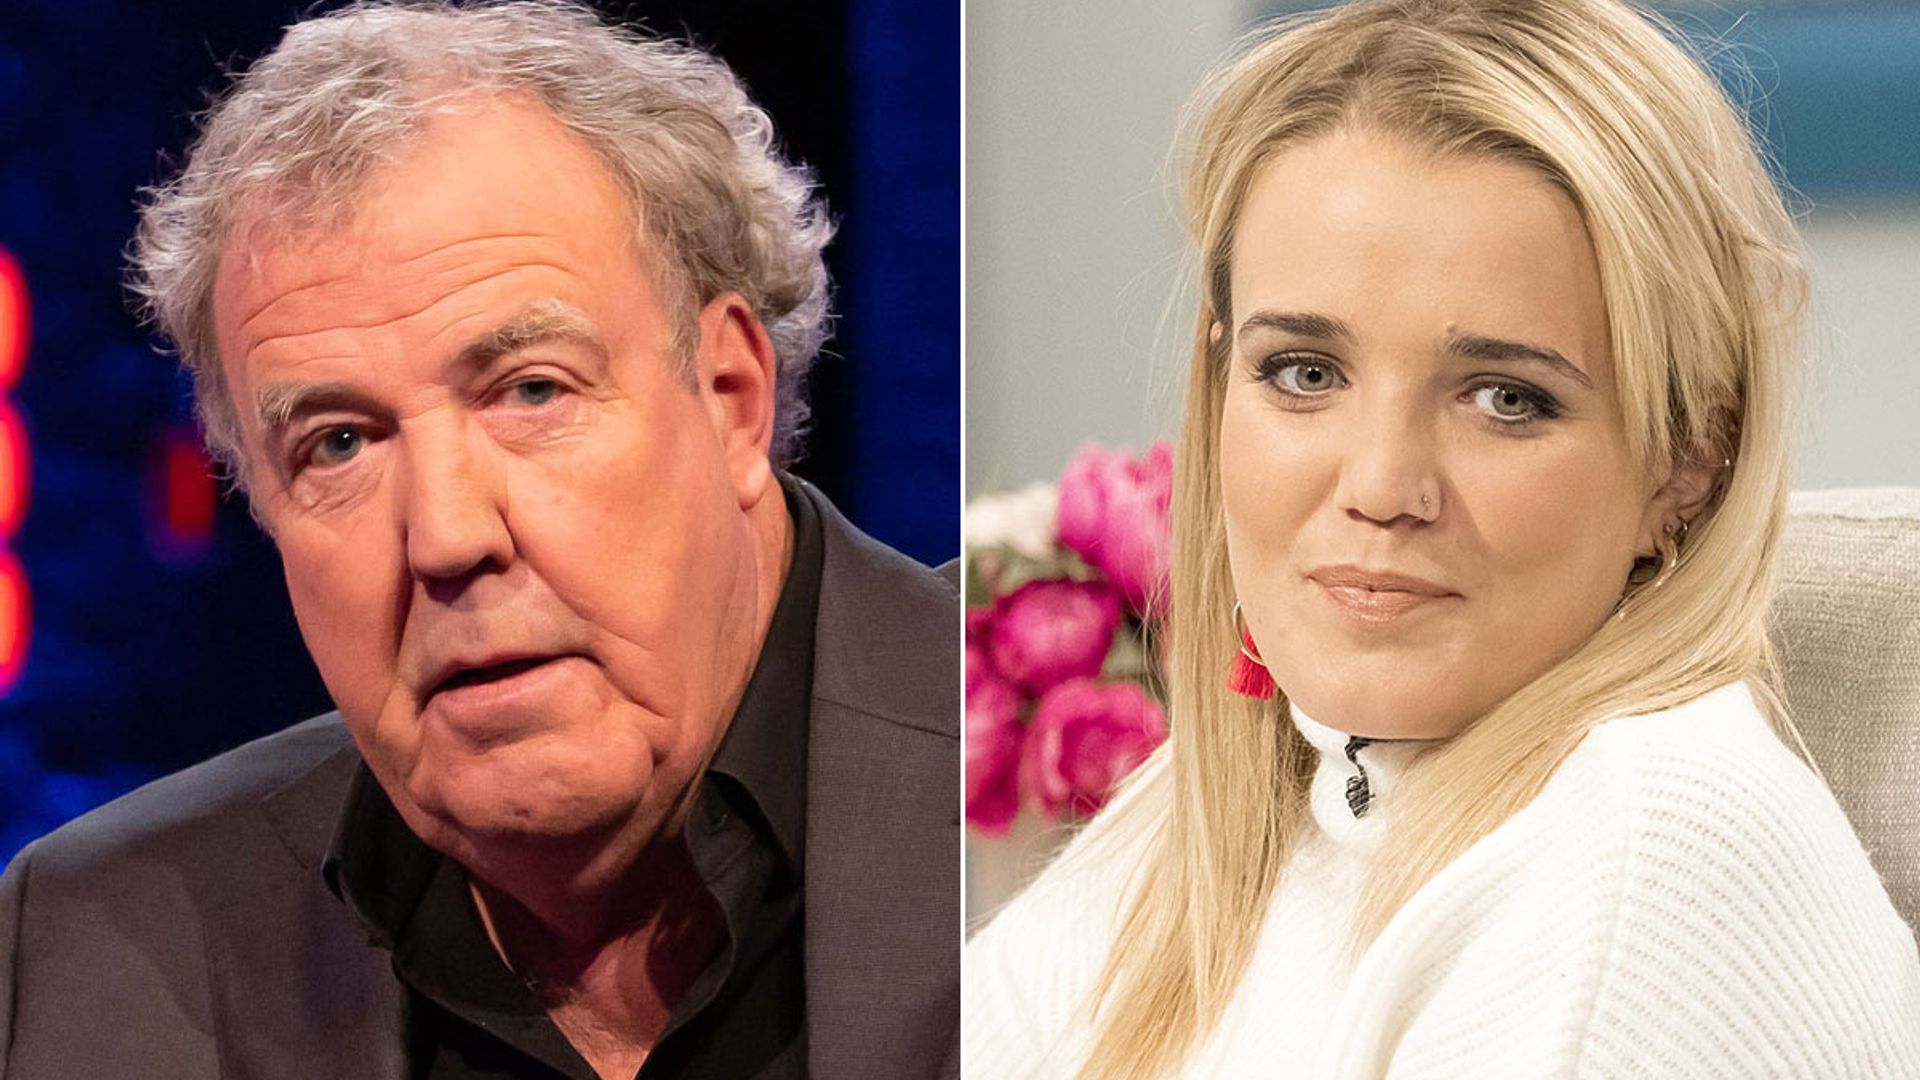 Jeremy Clarkson's daughter Emily looks like a film star in special wedding photos